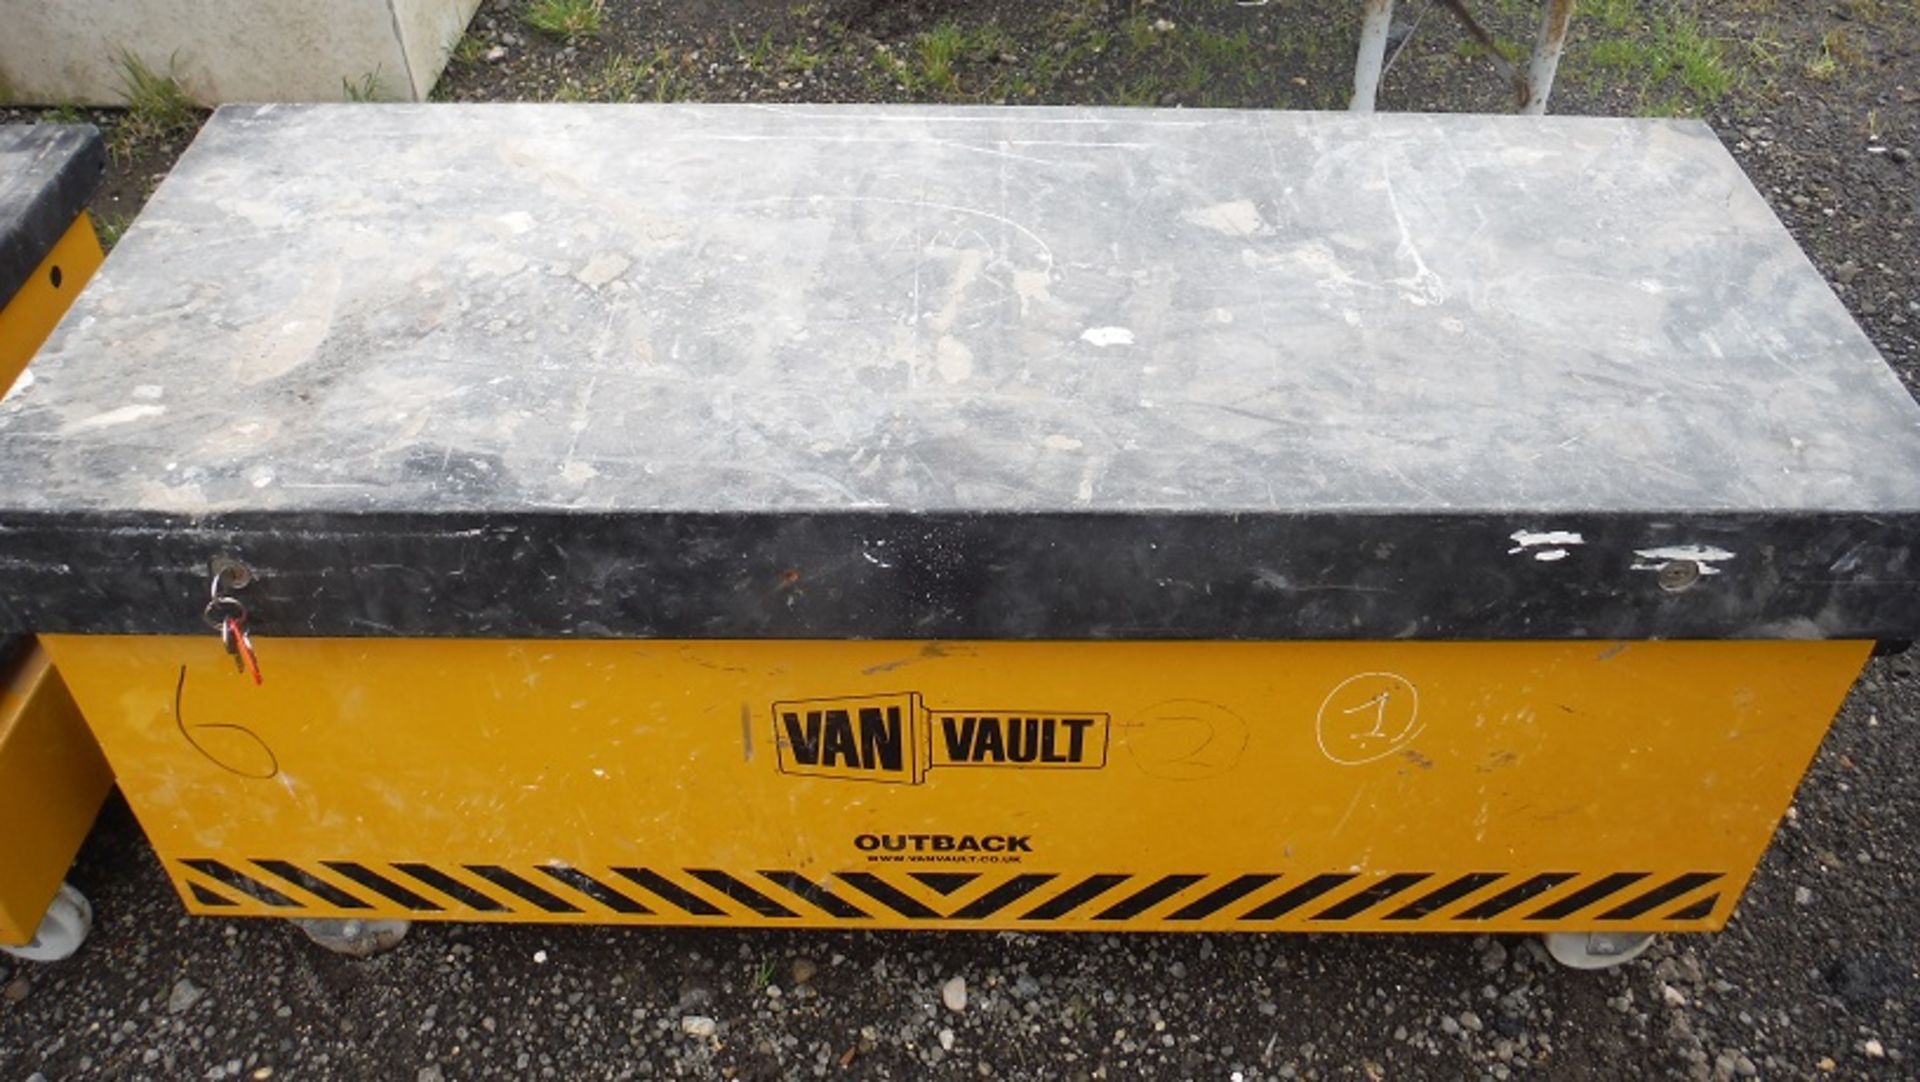 Outback Vault secure van store - Image 2 of 3